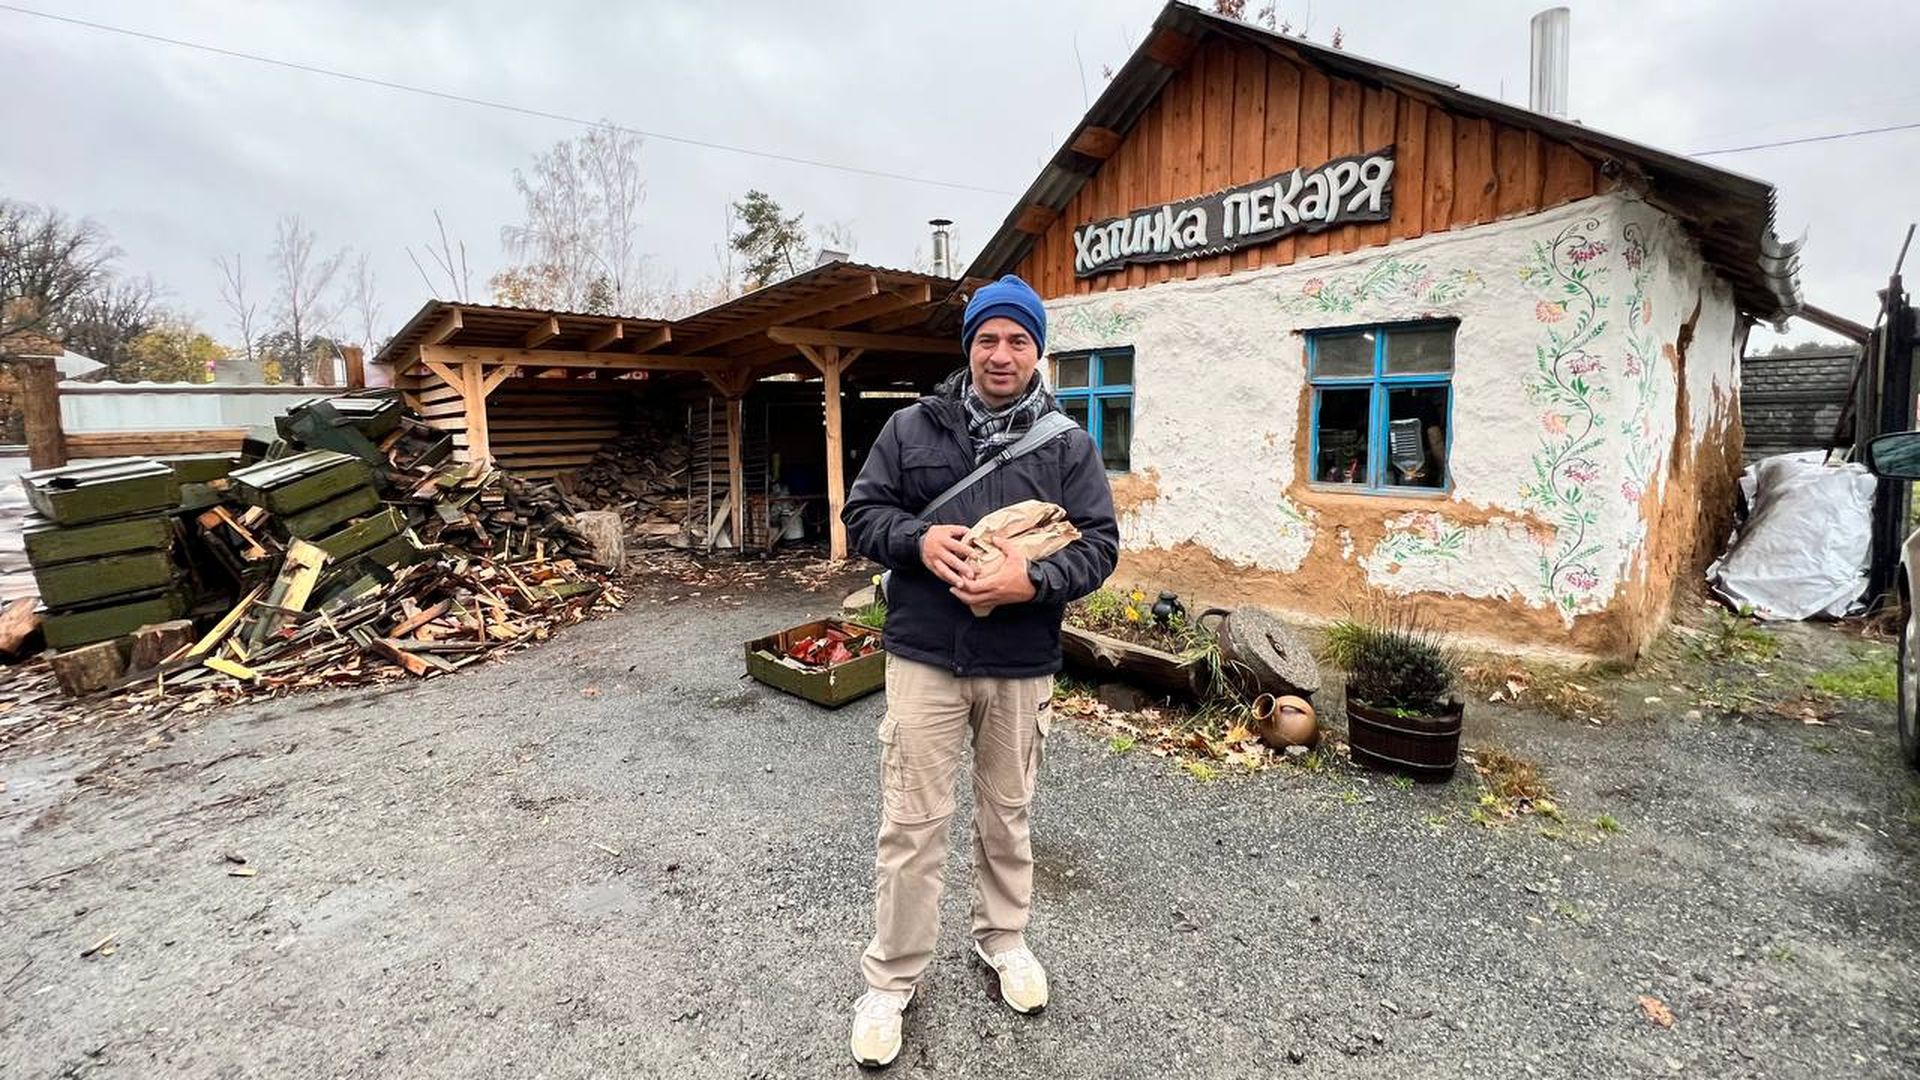 man stands in front of derelict building holding bread 